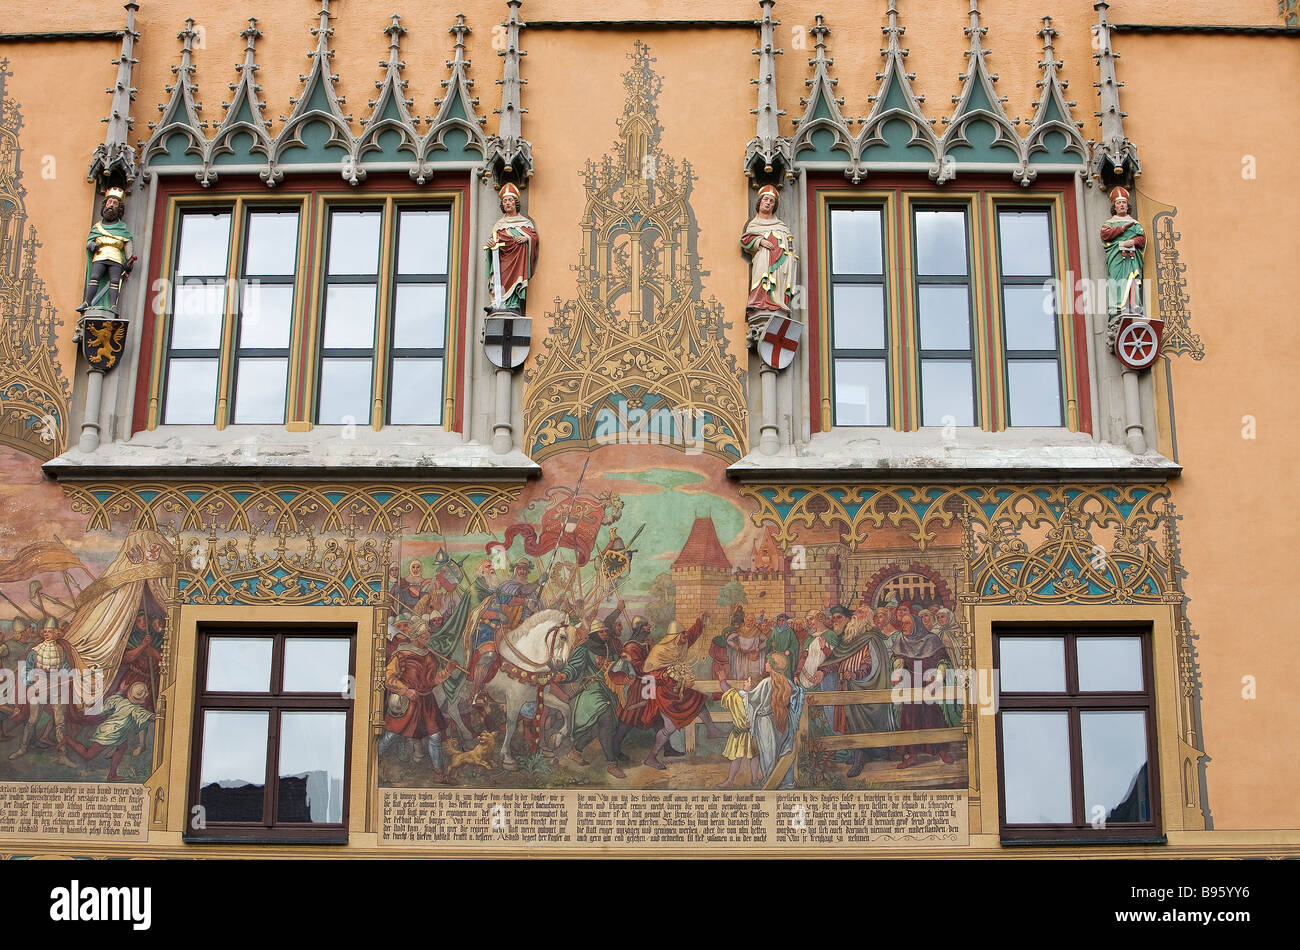 Germany, Bade Wurtemberg, Ulm, Albert Einstein' s birthplace, Rathaus (Town Hall) with Gothic tyle built in 1370, painted Stock Photo